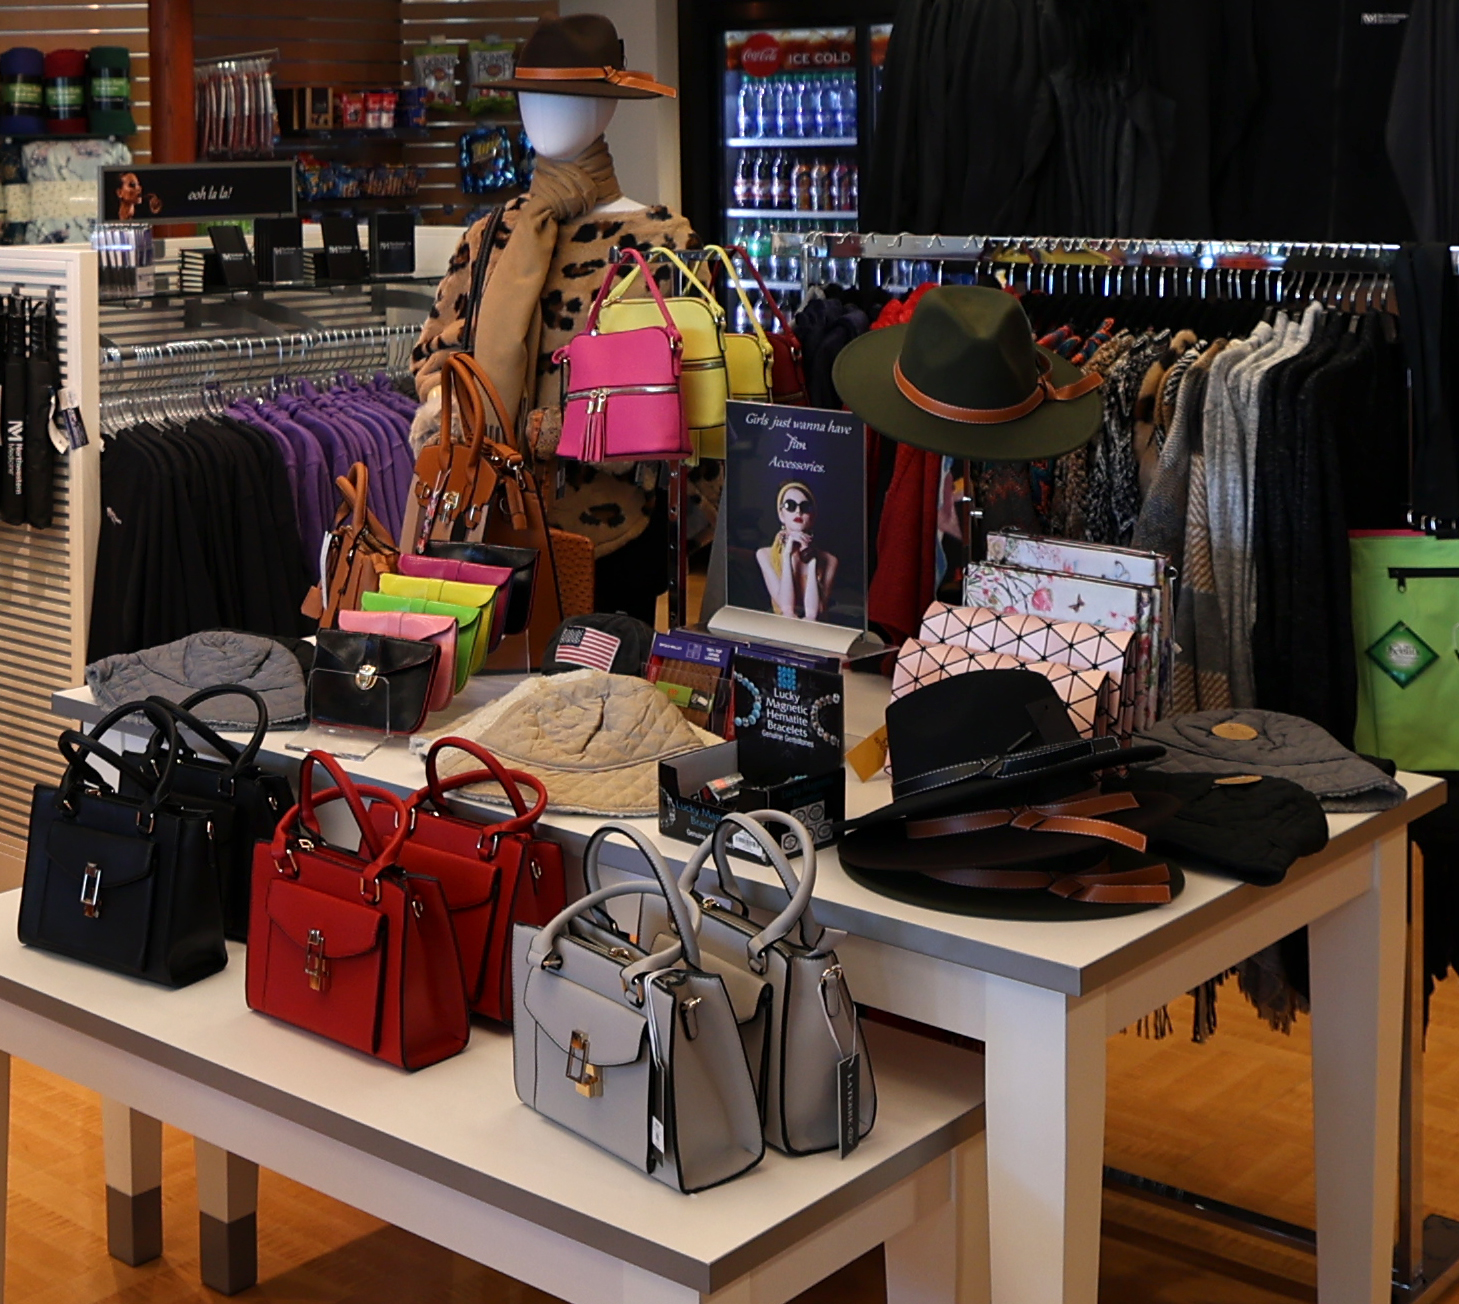 Handbags and fashion accessories at the Cloverkey gift shop in Delnor Community Hospital